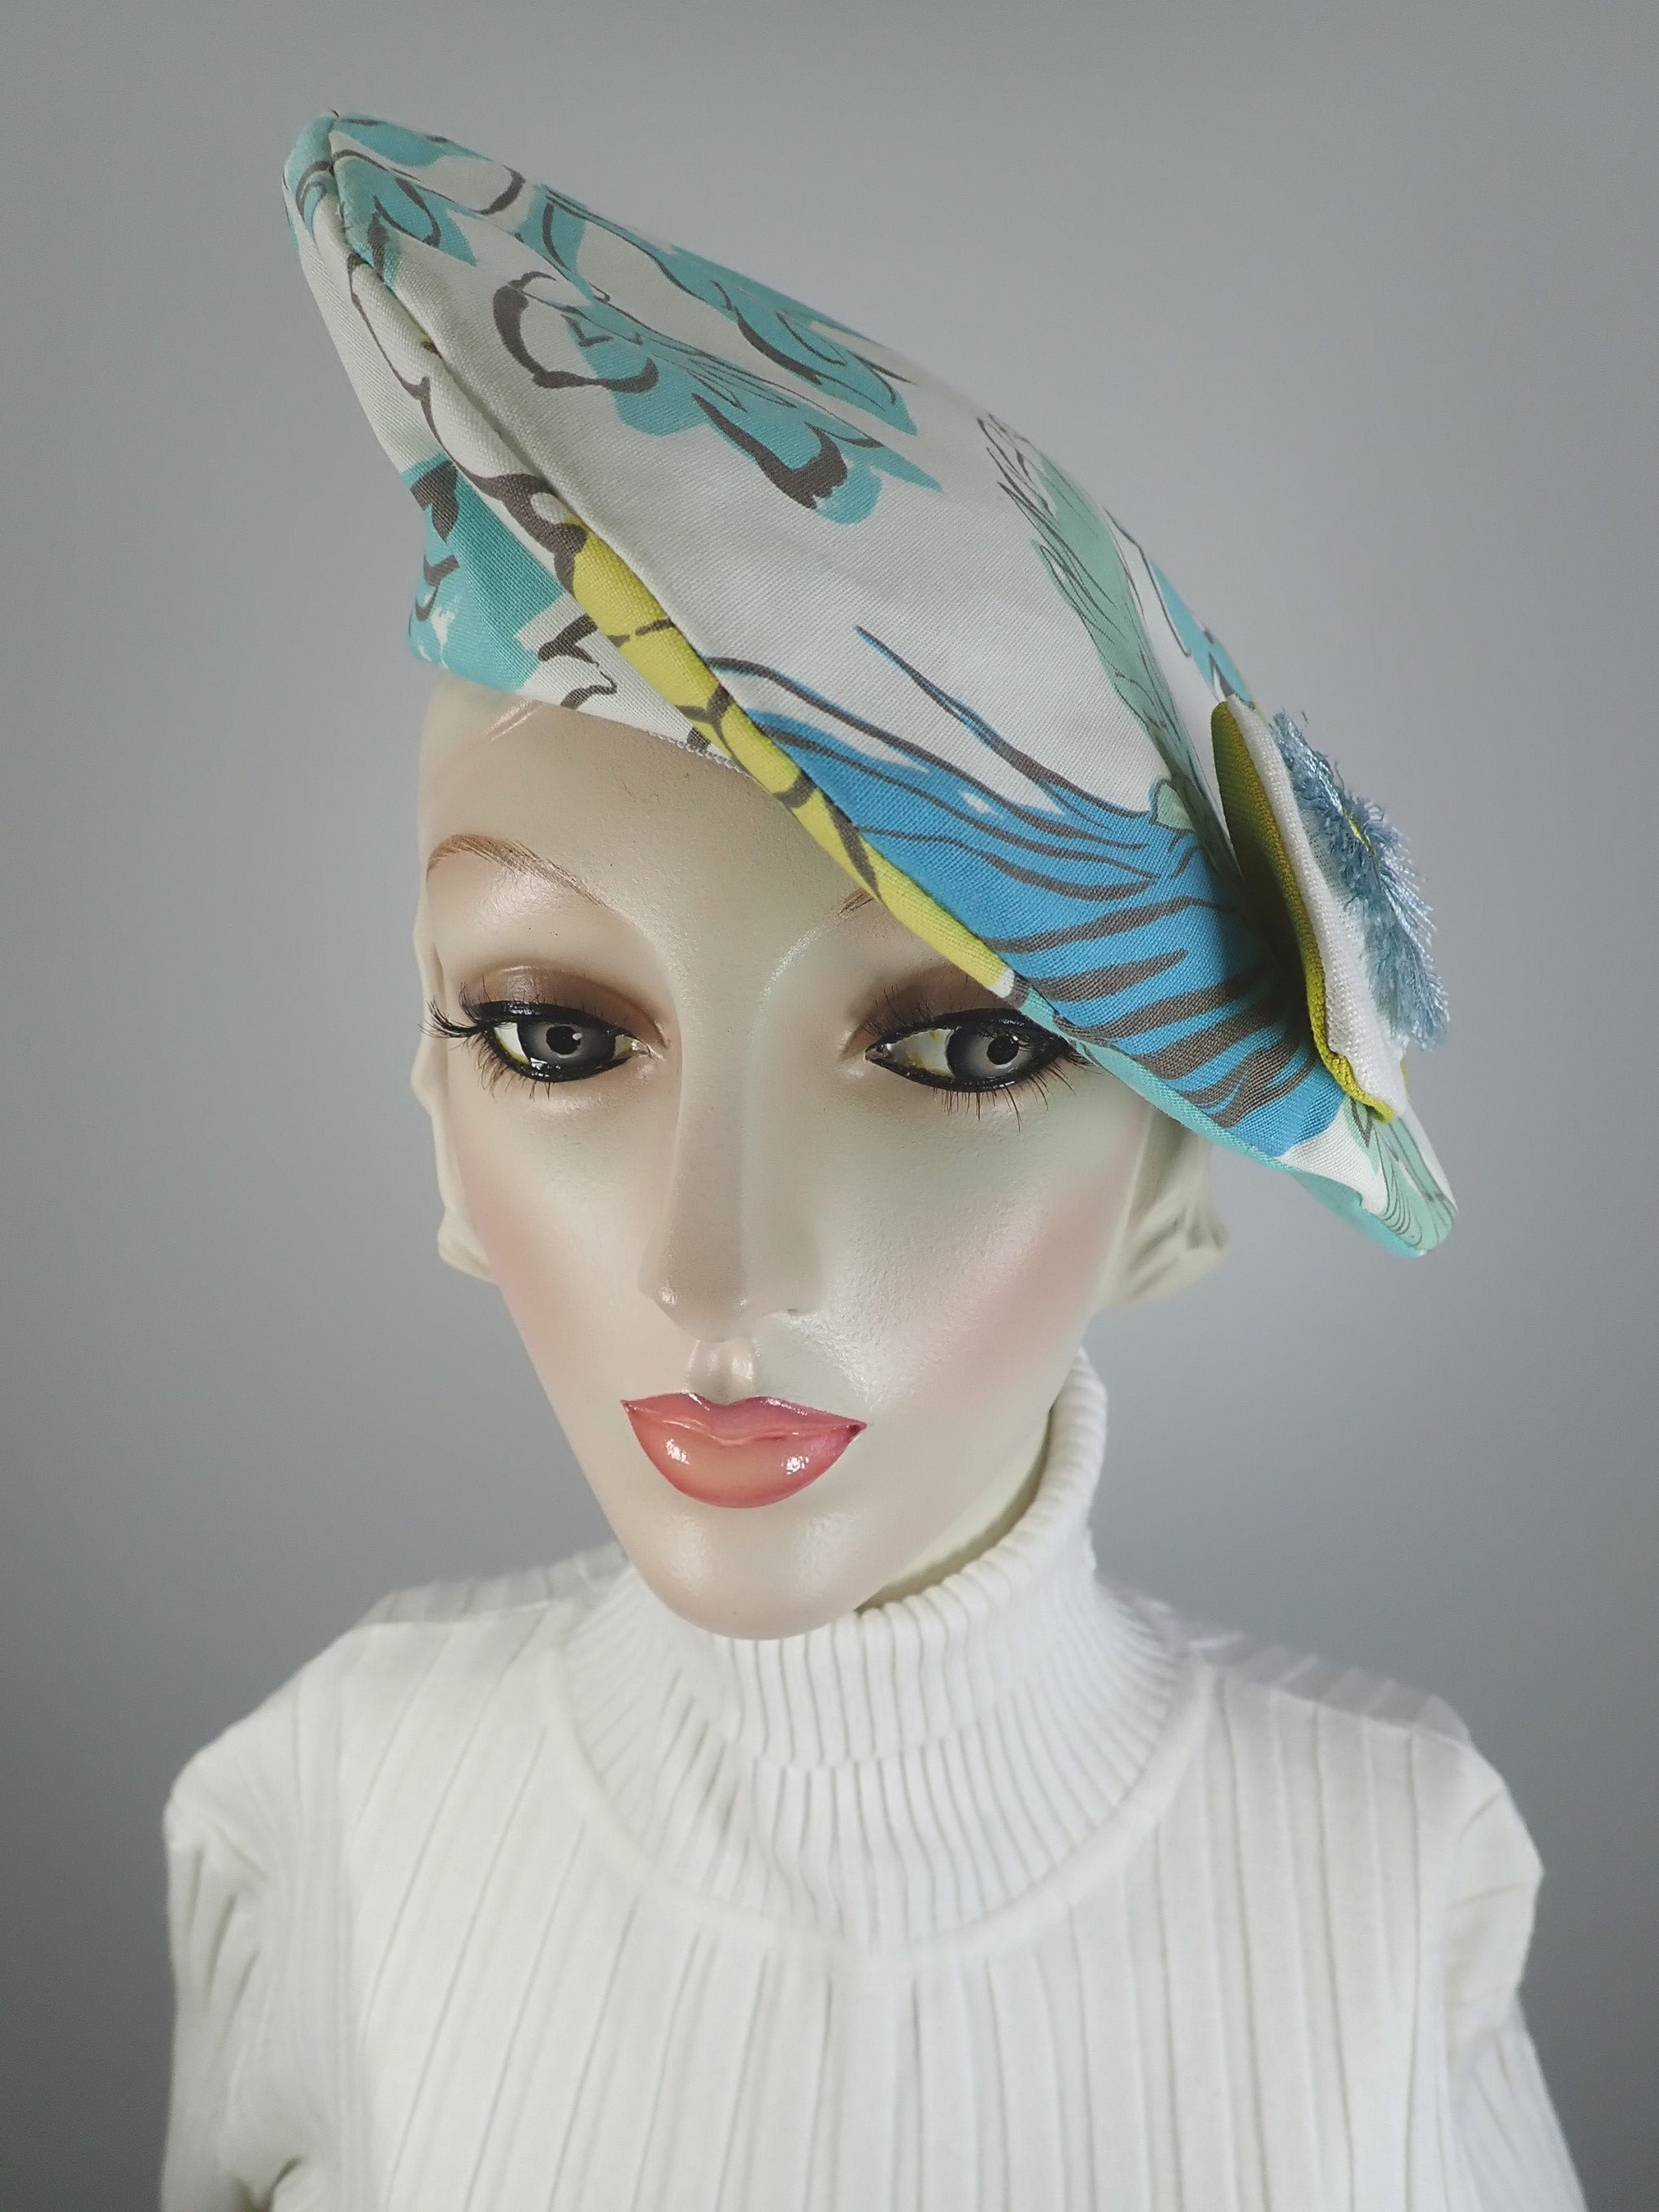 Funky fun beret Hat 1940s style. Colorful Floral asymmetrical beret hat. Sustainable fabric Statement hat. Soft fabric beret.